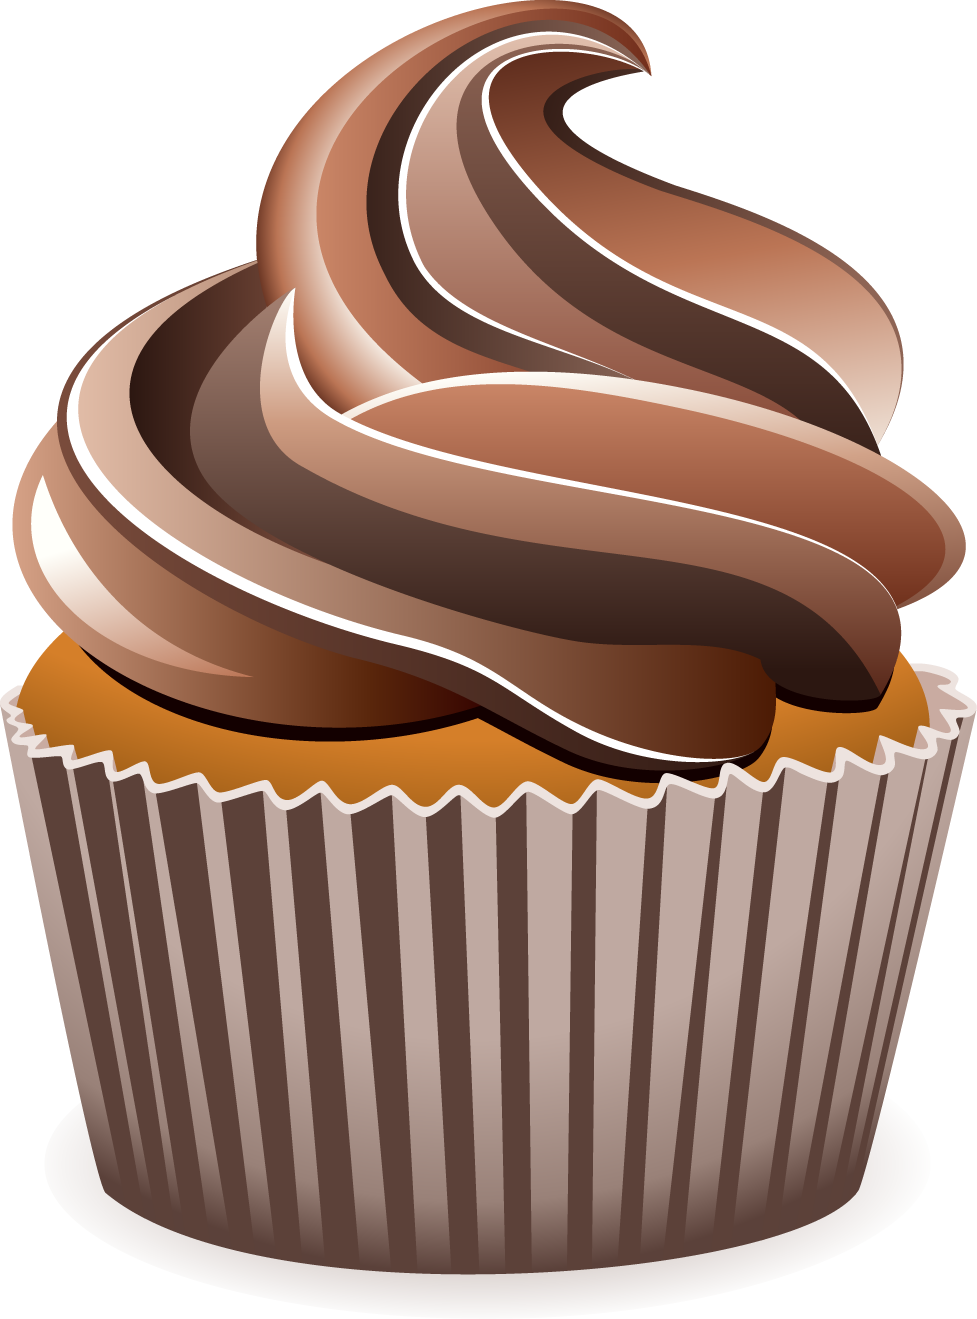 Cupcake clipart free download free clipart images 3 - Clipartix